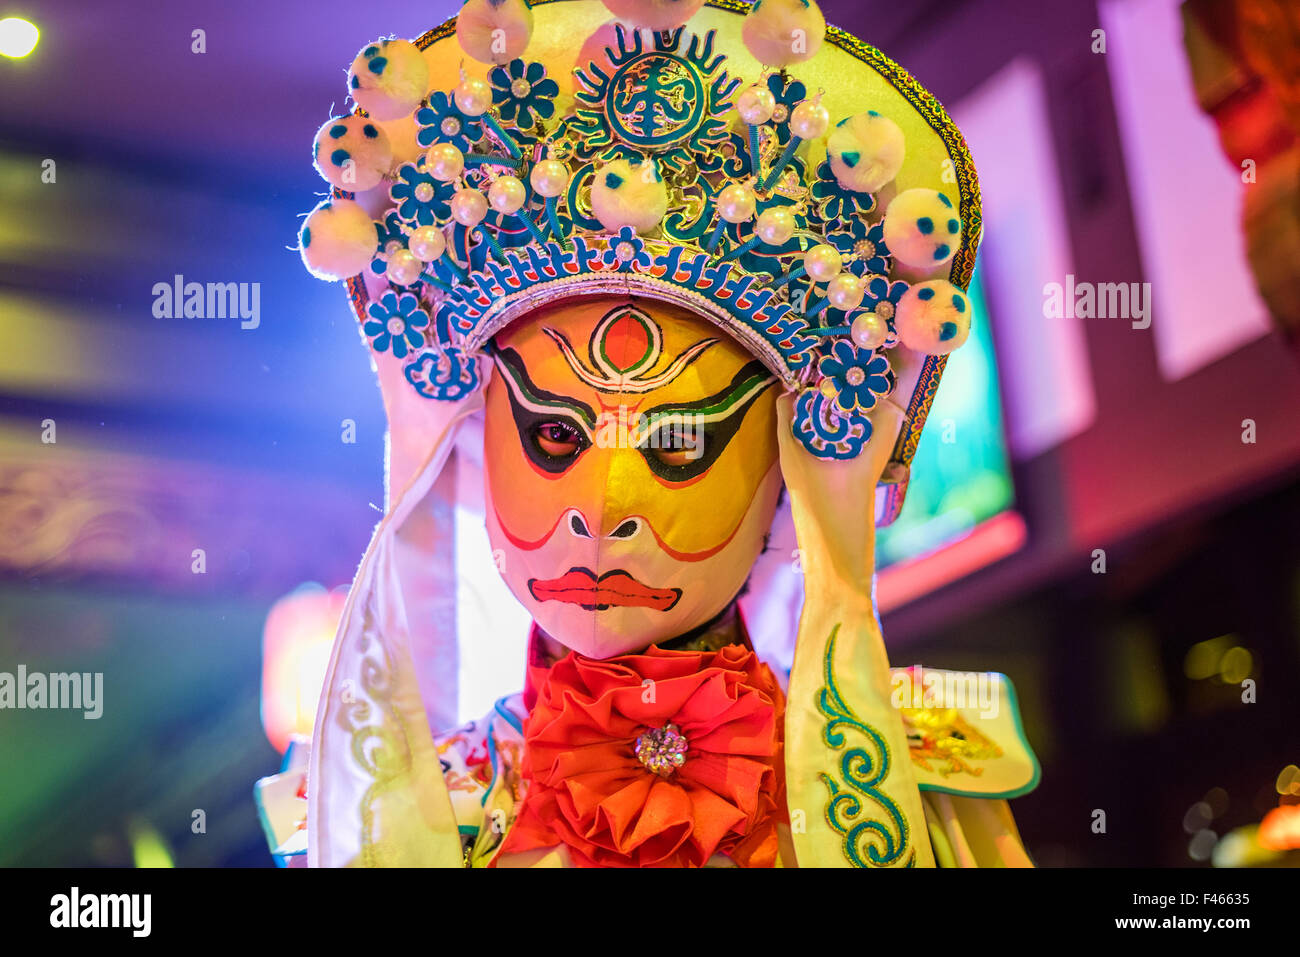 Chengdu, Sichuan Province, China - October 8, 2015: Chinese artist perform traditional face-changing onstage. Stock Photo